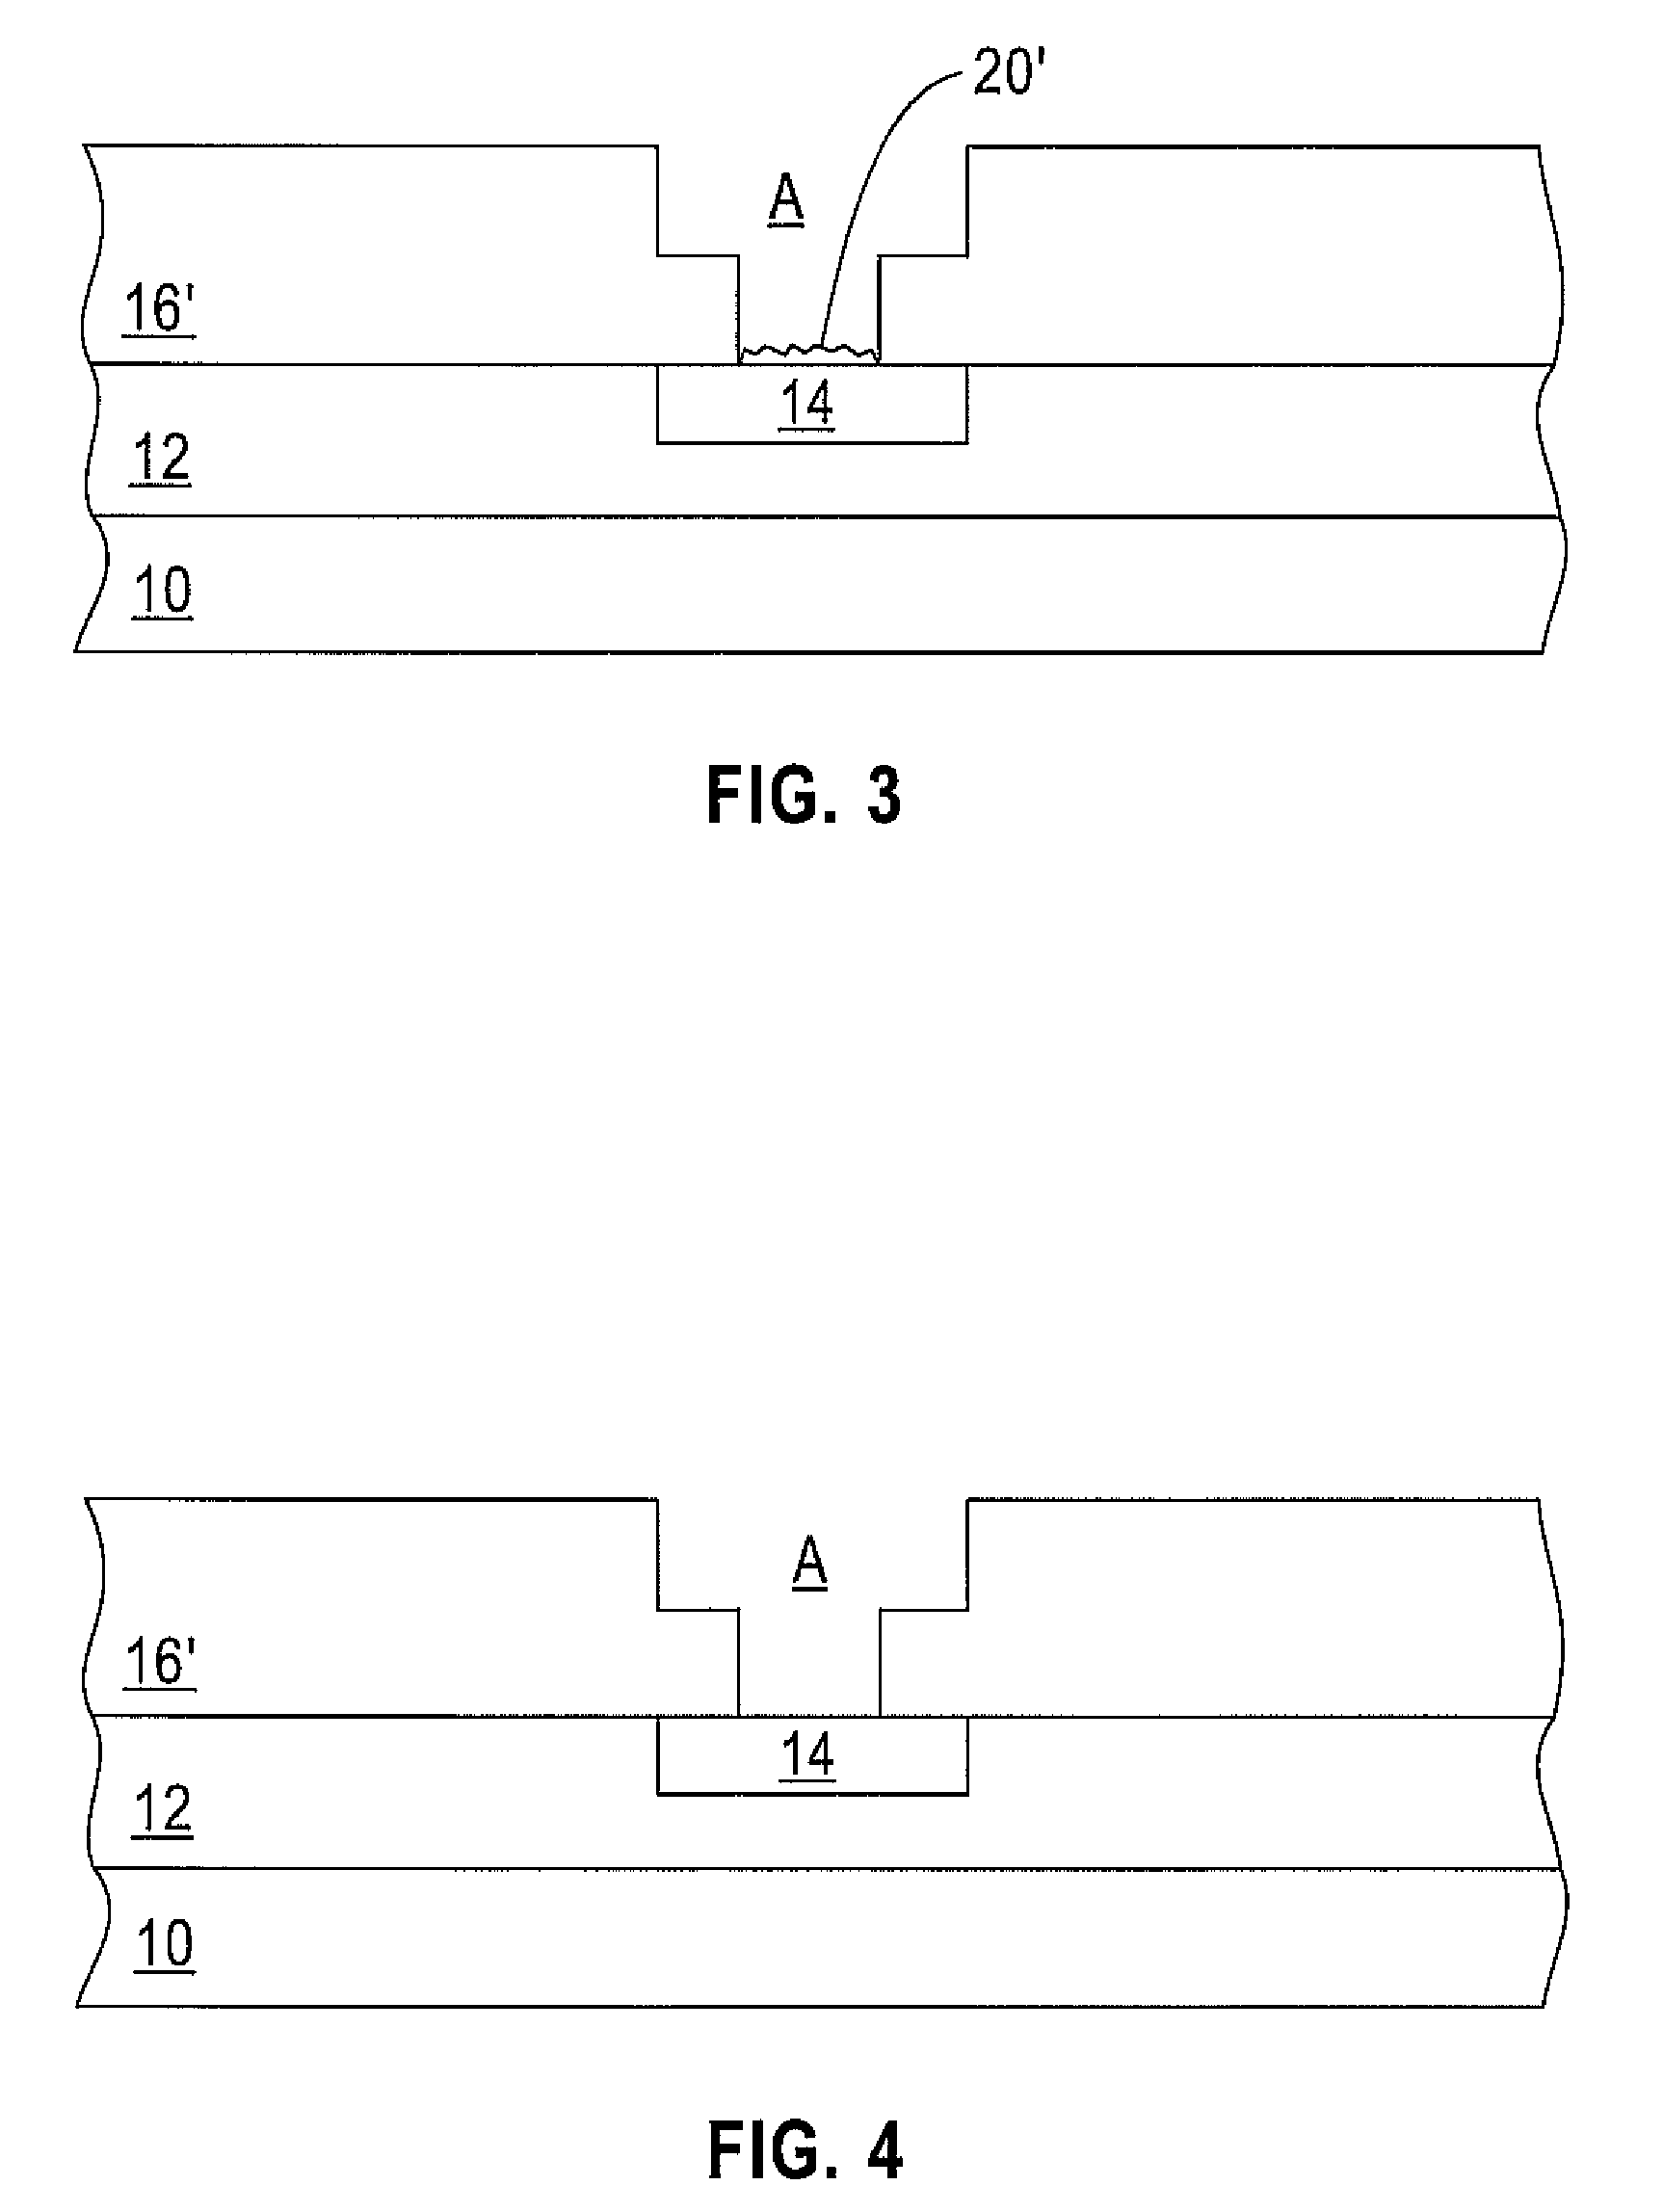 Cleaning process for microelectronic dielectric and metal structures